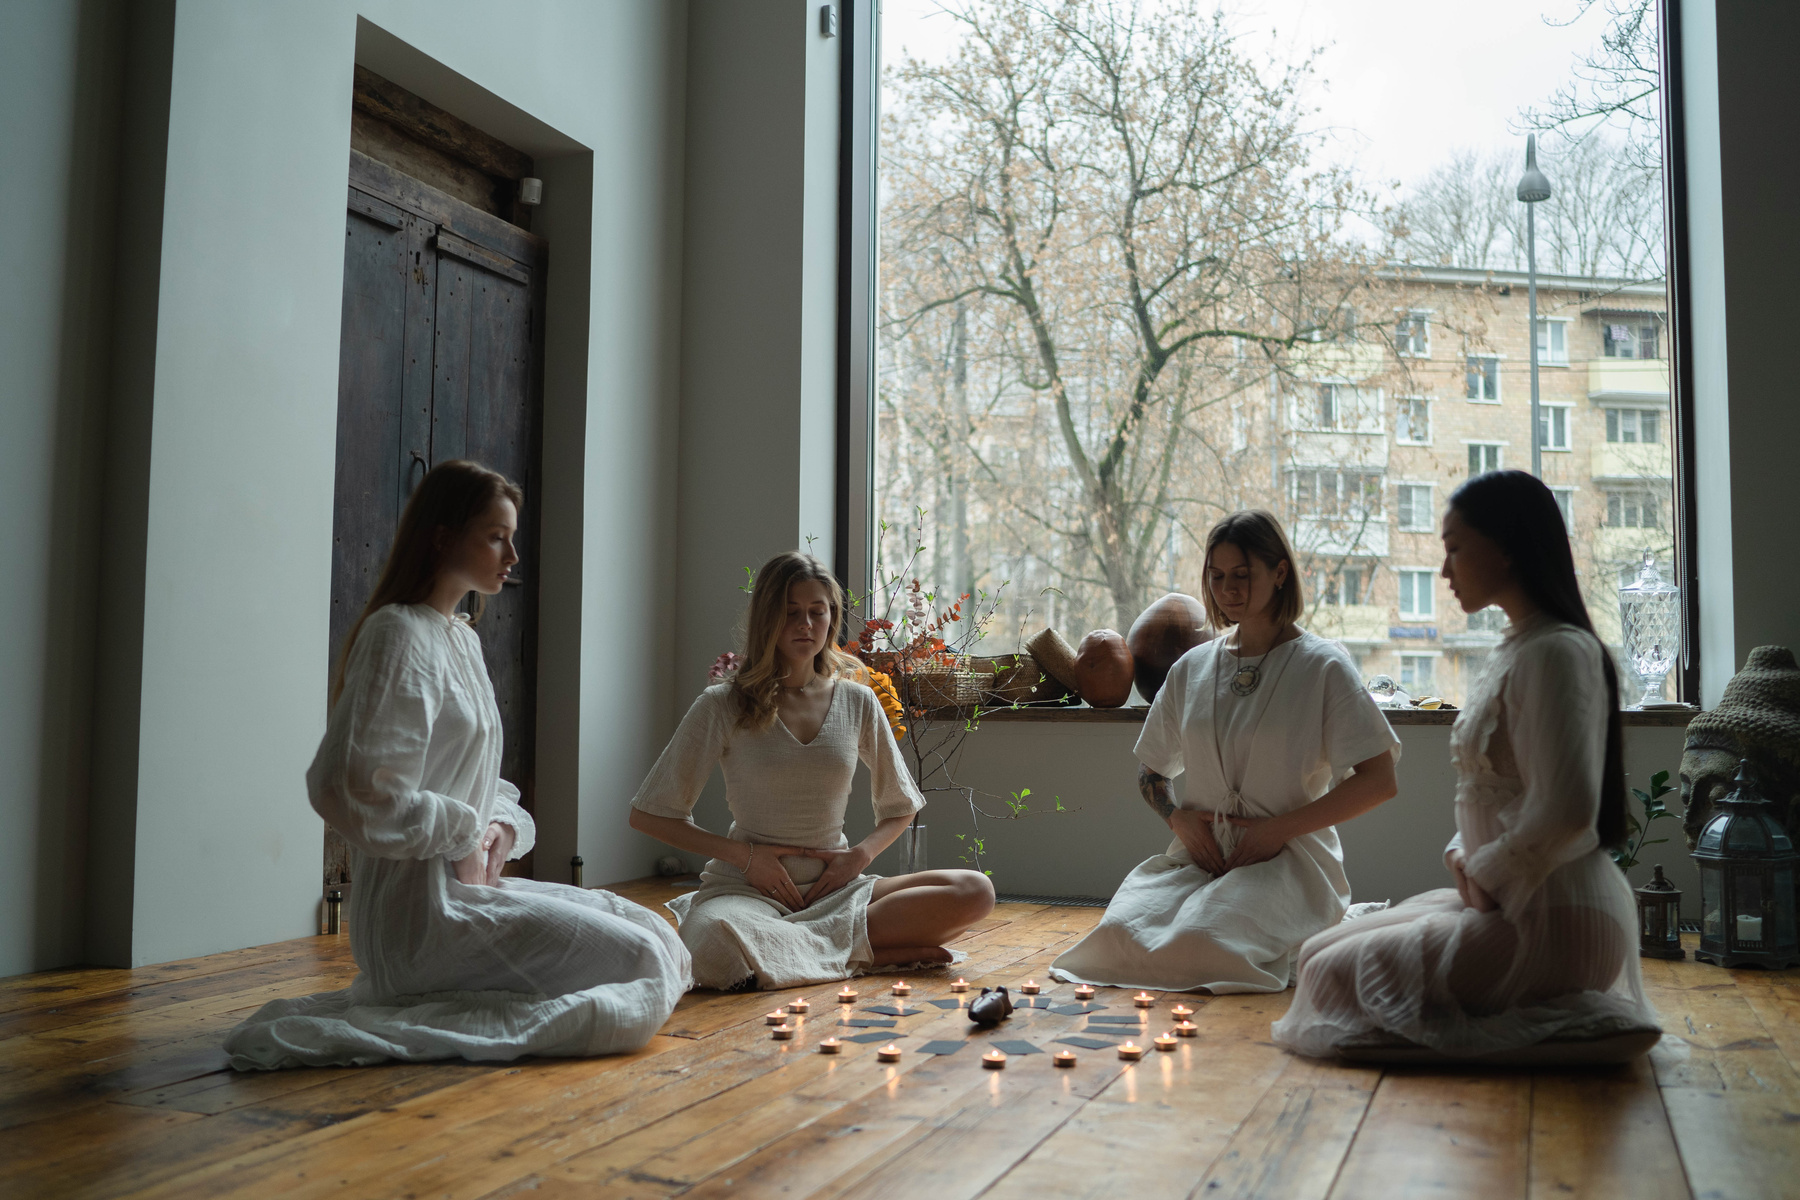 Women in White Dresses Doing Ritual Together